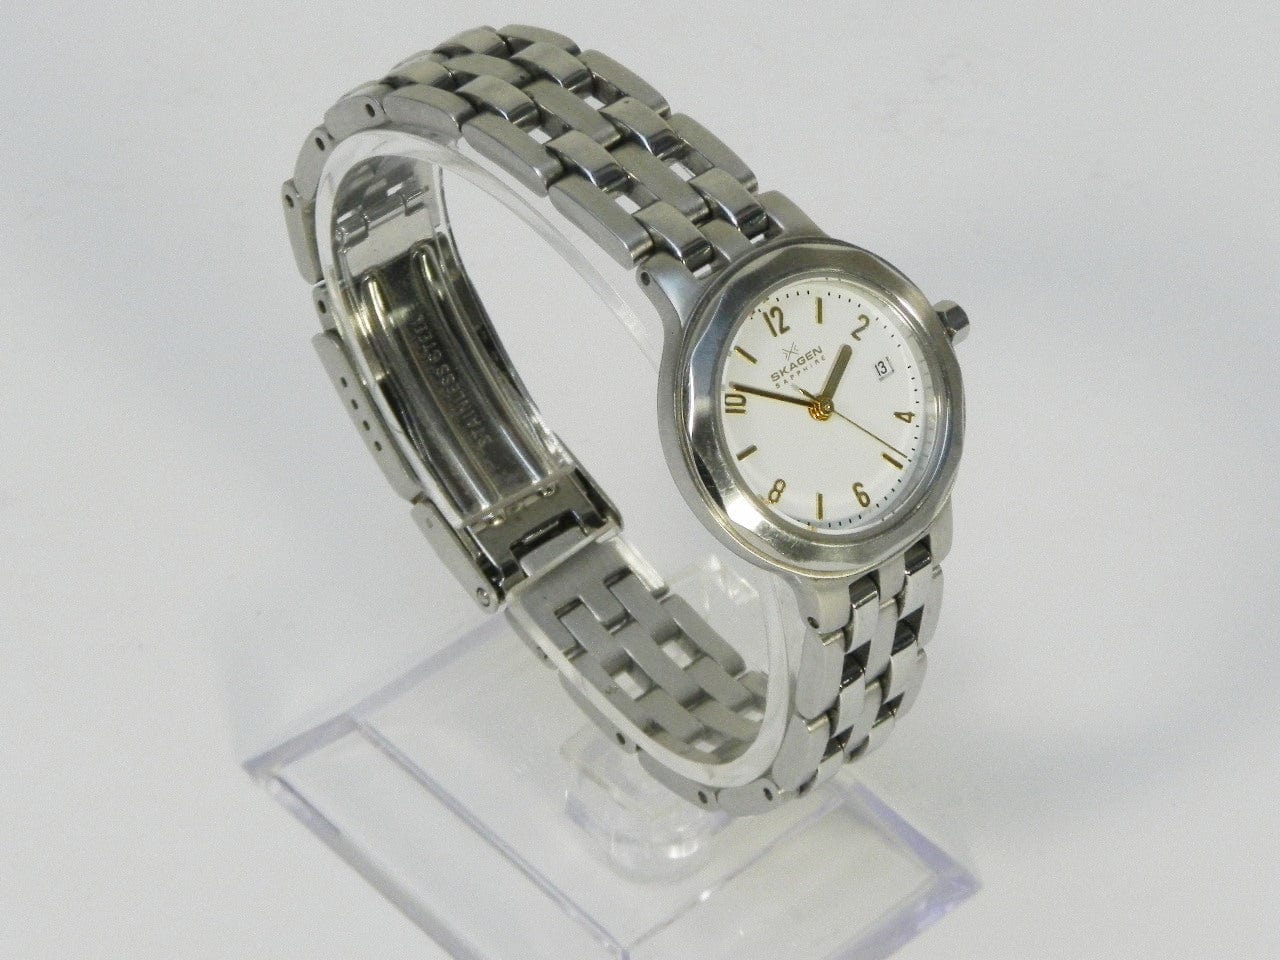 I Like Mikes Mid Century Modern Clock Skagen Sapphire Women's Round Silvertone Watch, White Face, Gold Numbers